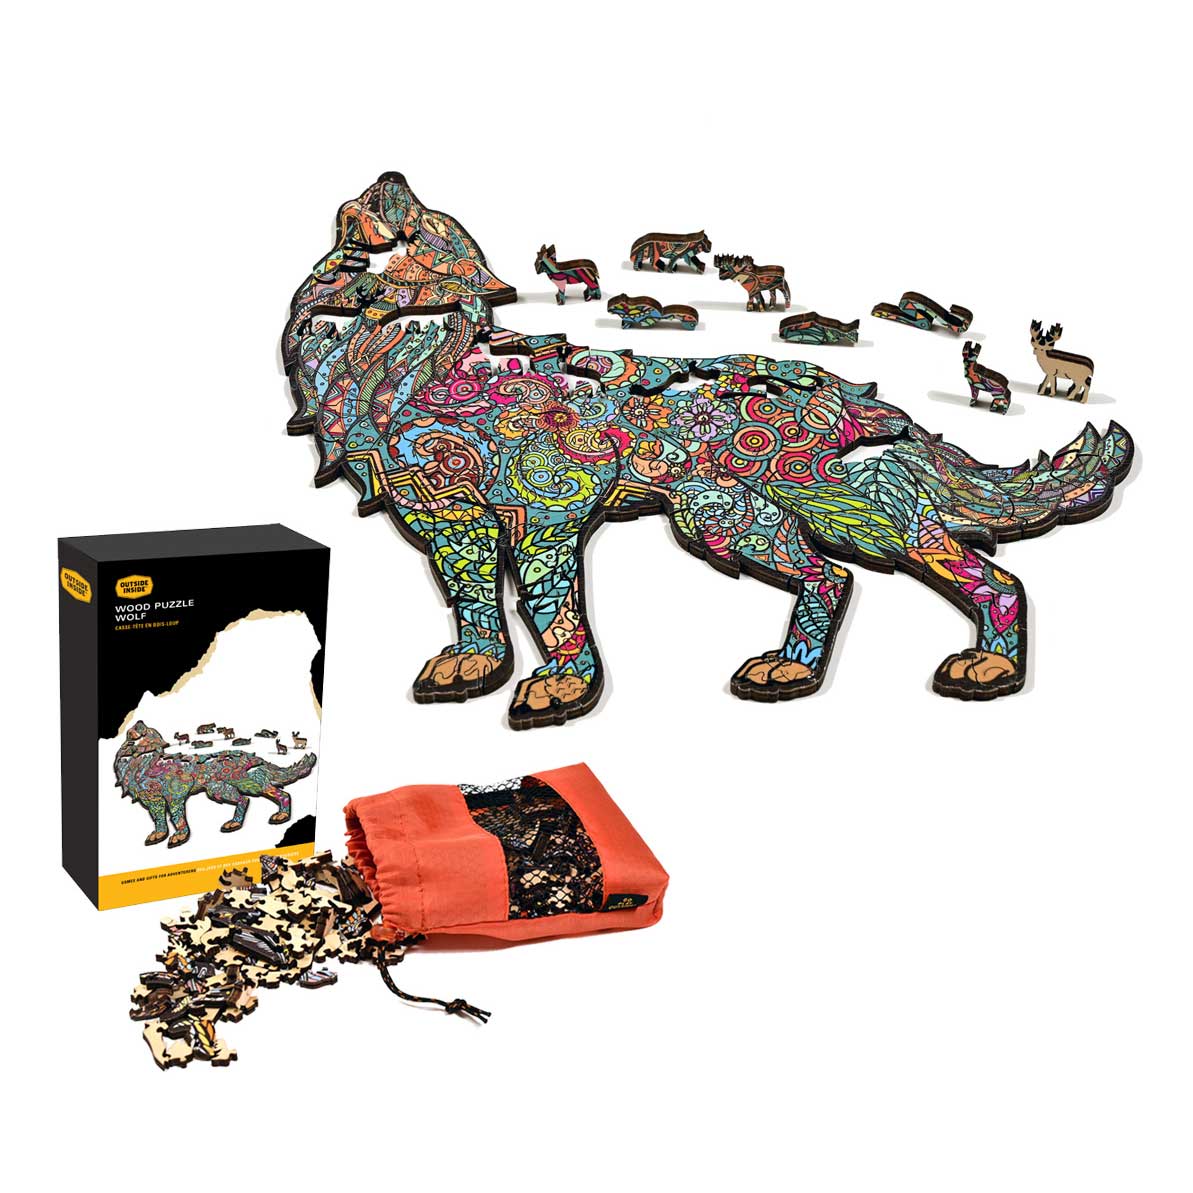 Timber Wolf Wood Puzzle